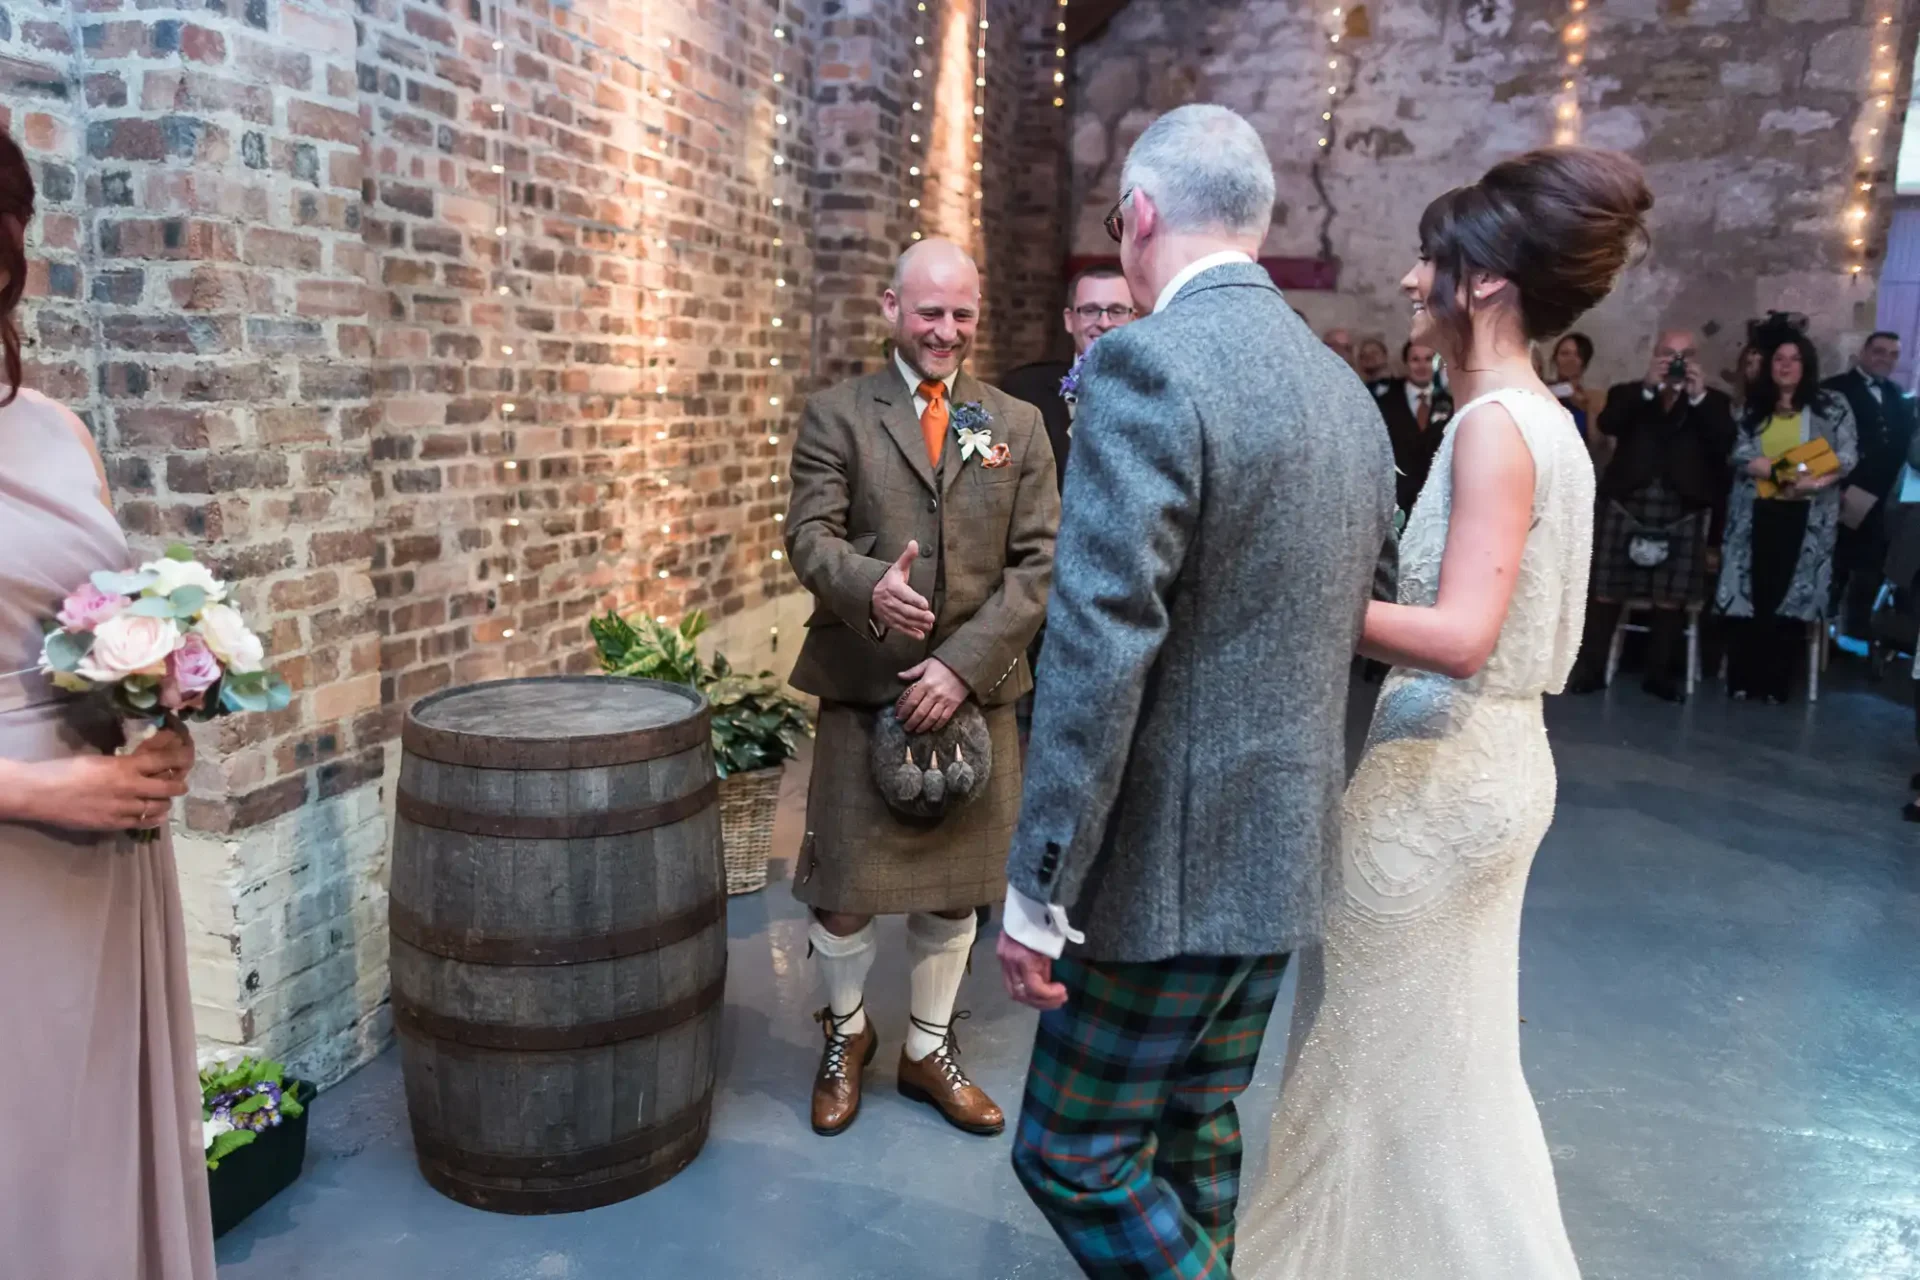 A wedding ceremony in a rustic venue with brick walls, featuring a smiling officiant and a couple holding hands, surrounded by guests.